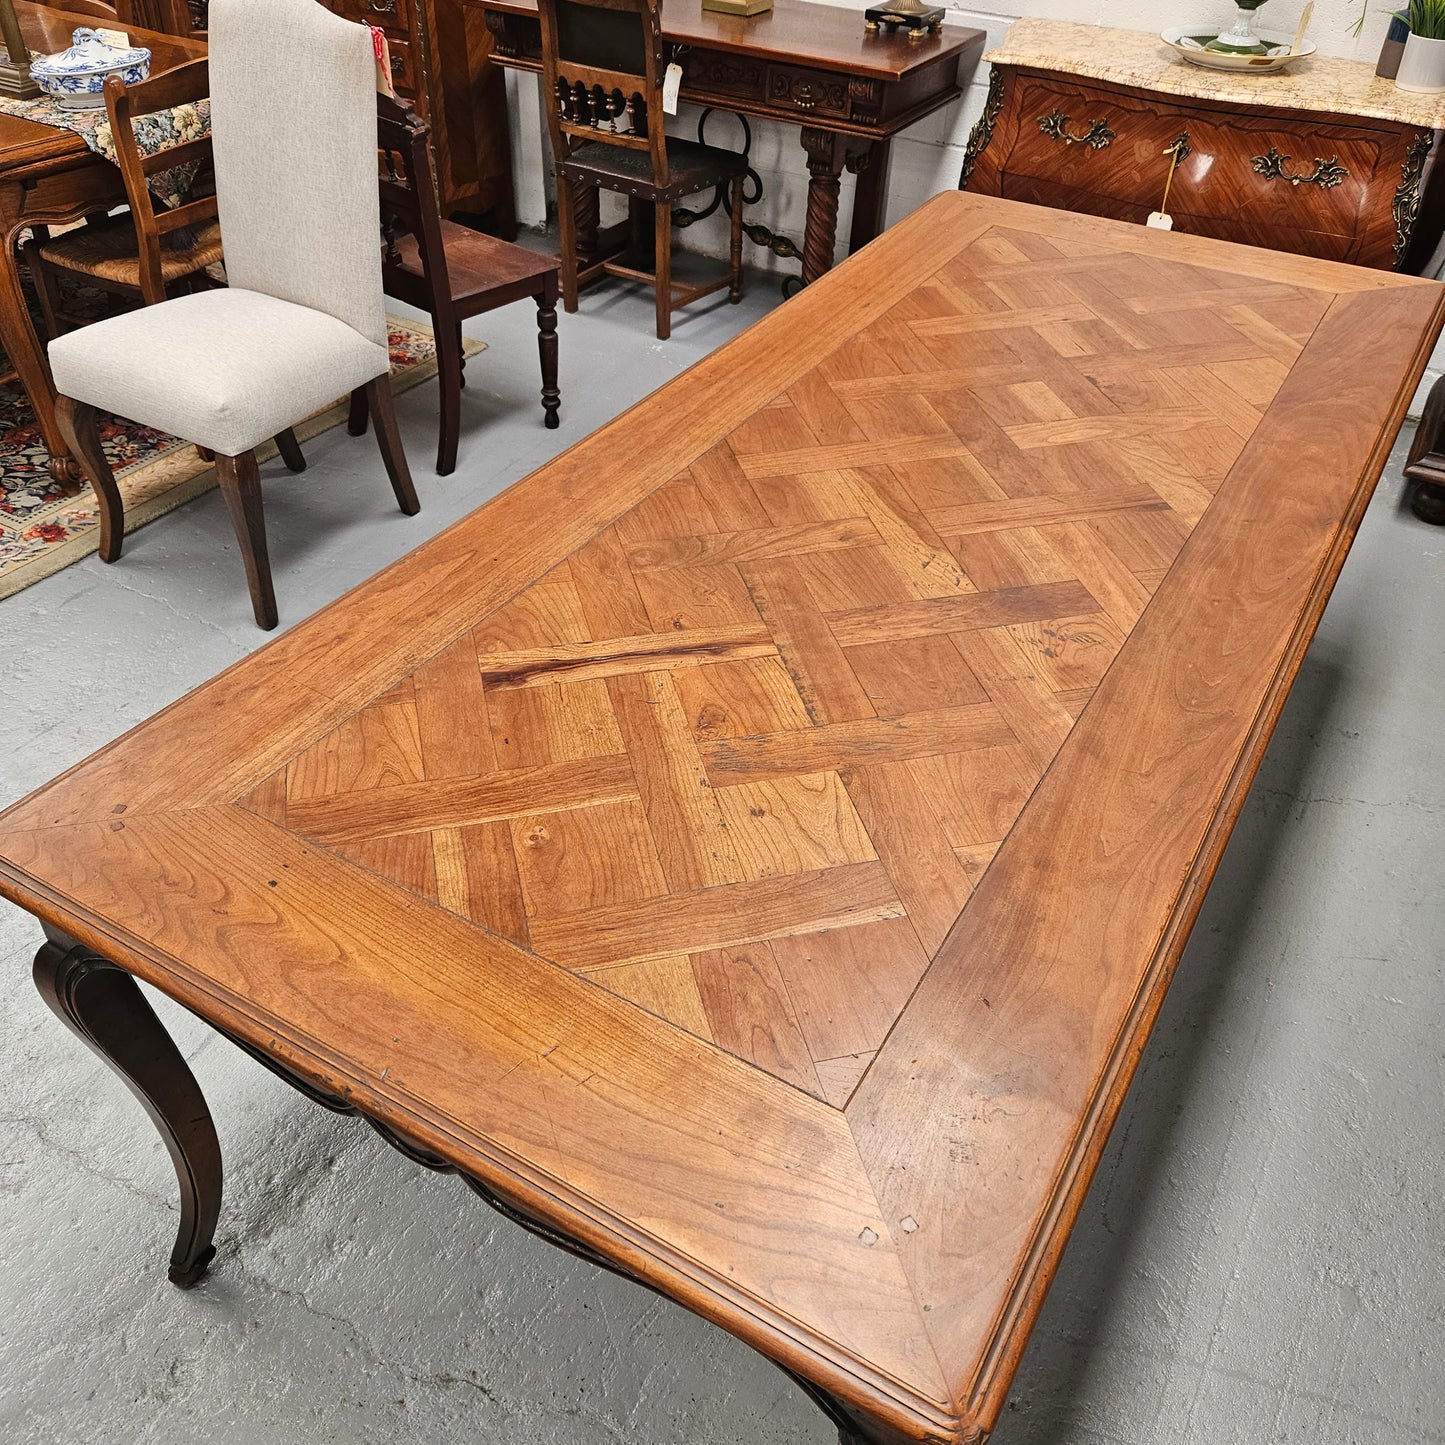 Louis XV Style Bespoke Parquetry Table